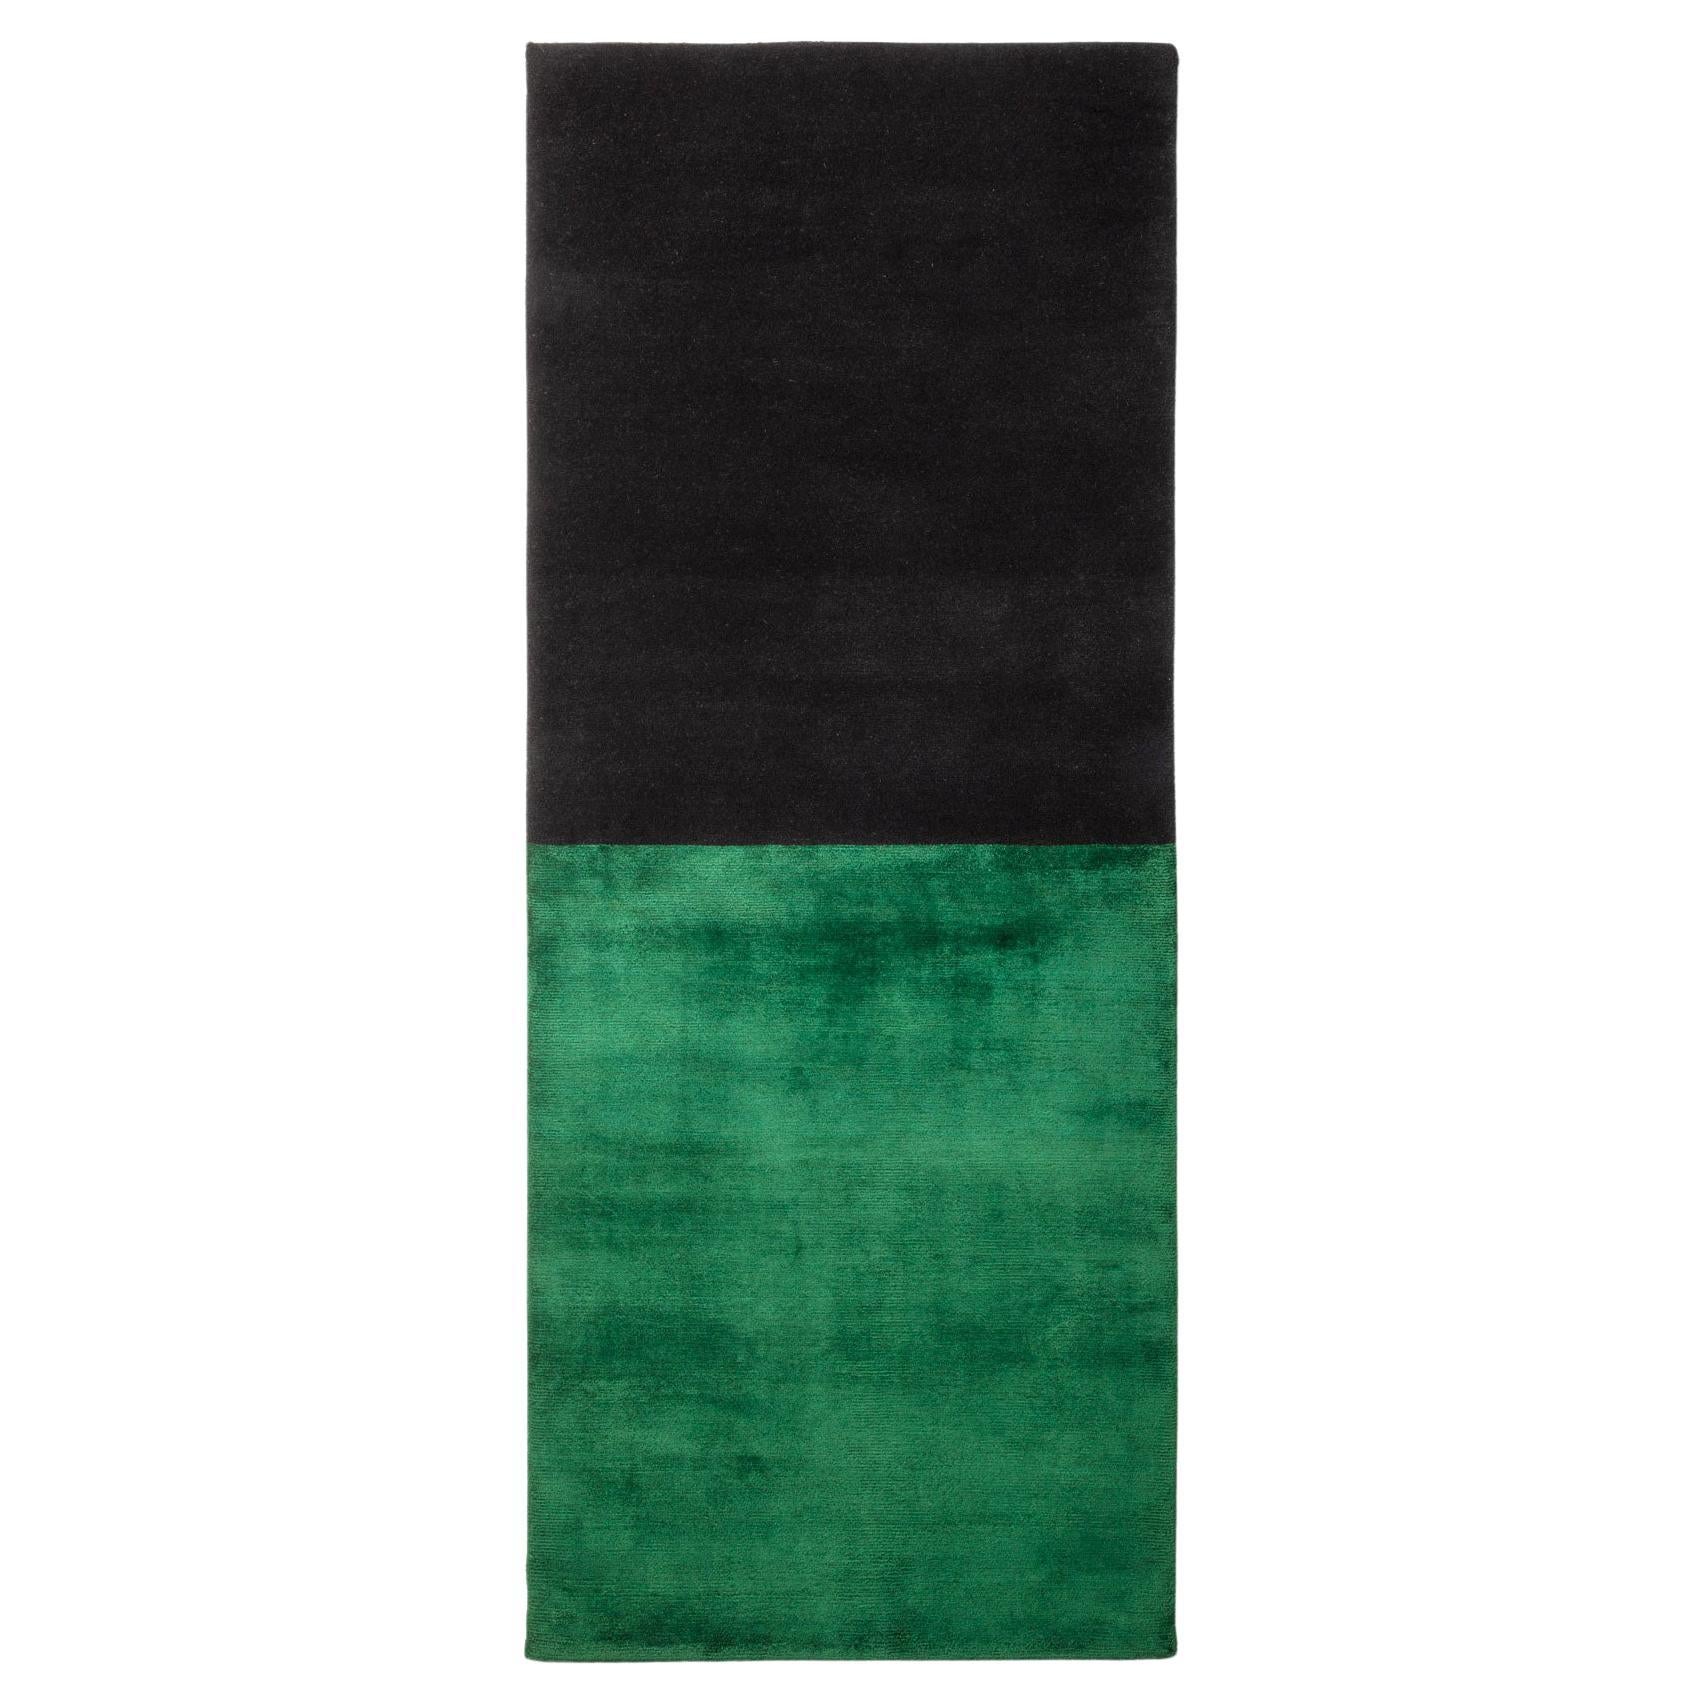 Black / Green Handwoven Tapestry by Calyah